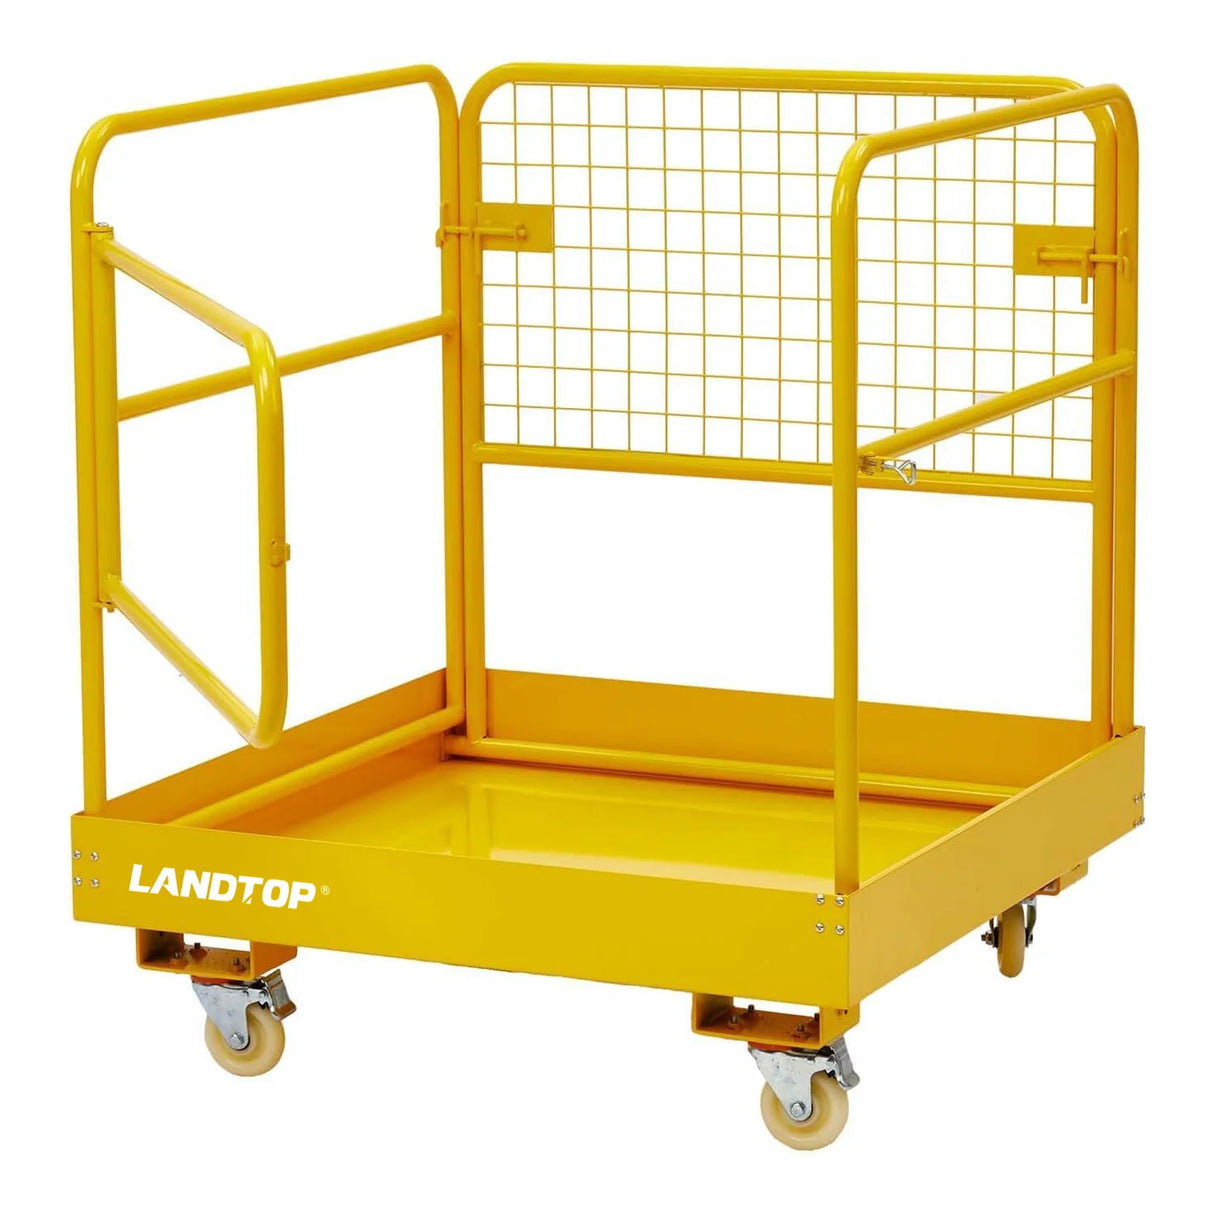 Forklift Safety Cage, 36"x36" inch Heavy Duty Collapsible Forklift Work Platform,1200LBS Capacity with 4 Universal Wheels, for Most Aerial Jobs